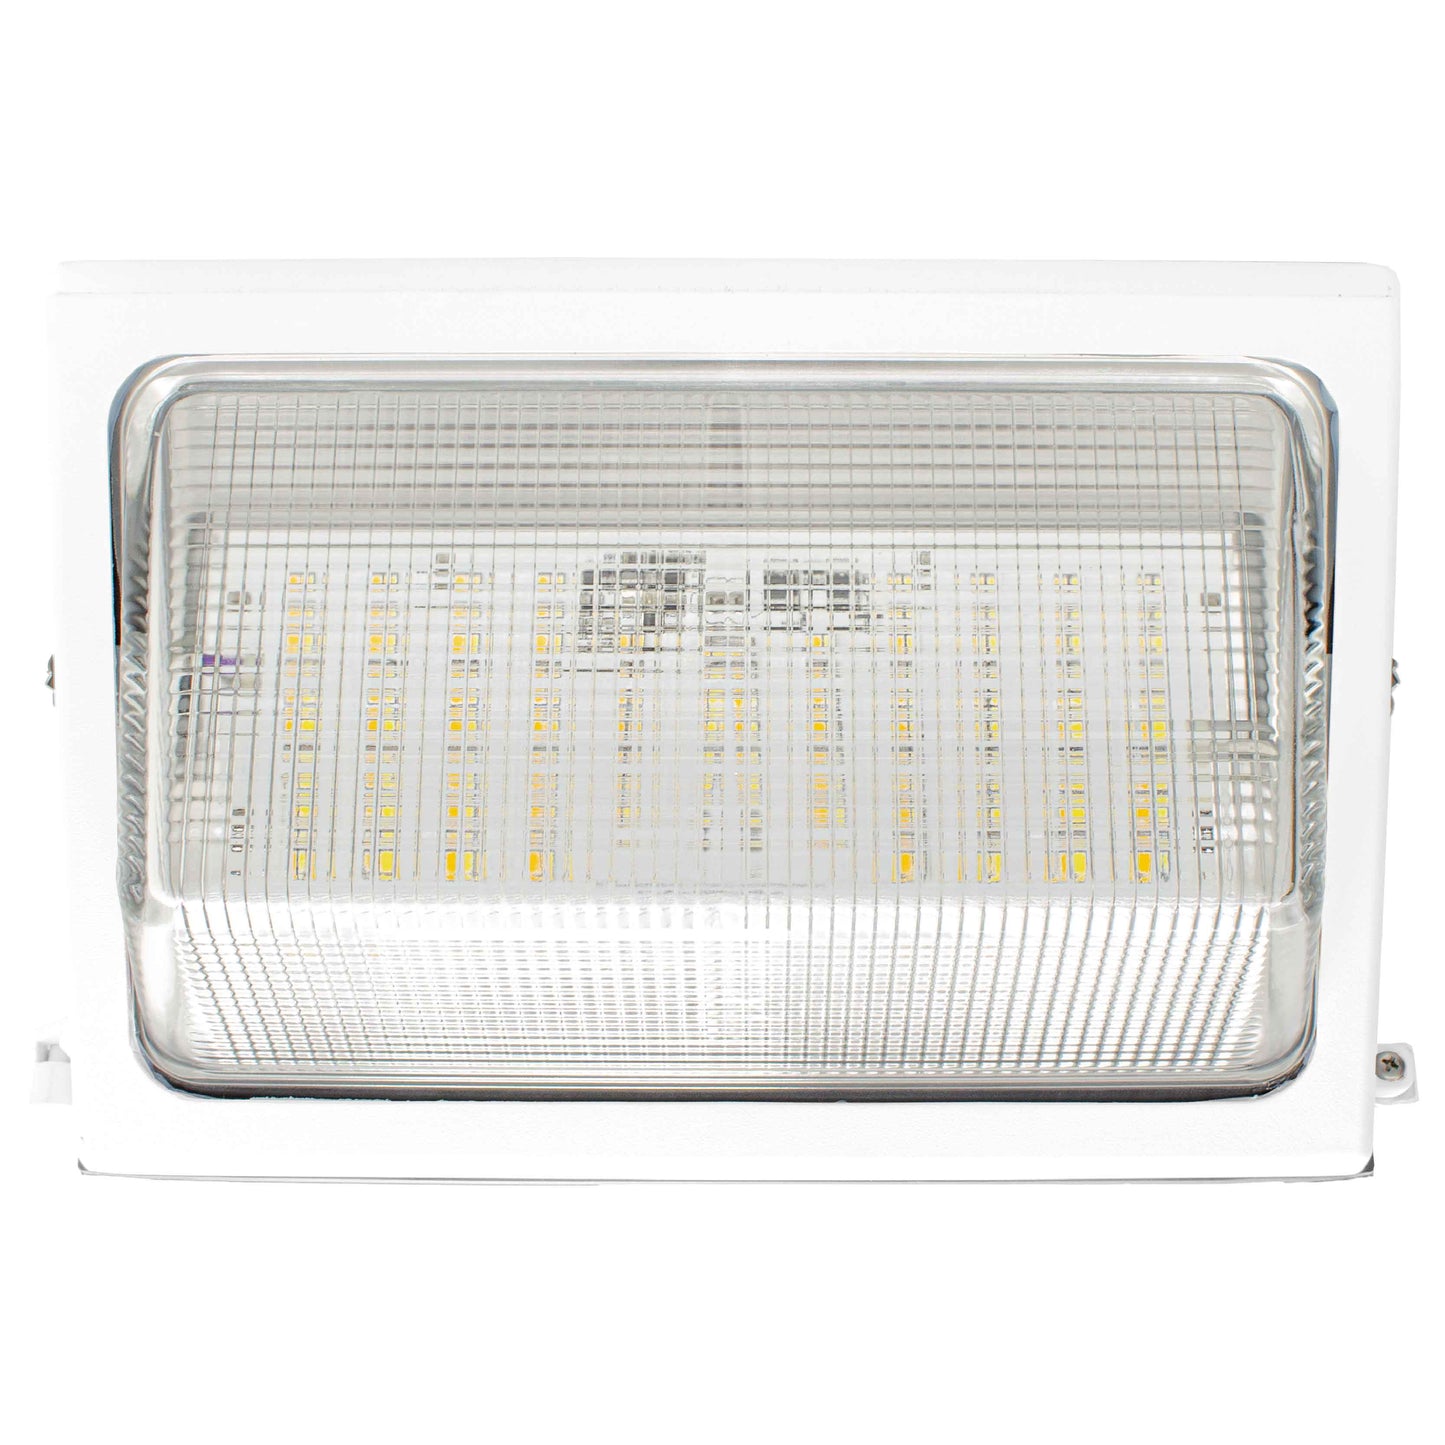 Westgate Lighting  Led Tunable Non-Cutoff Wall Packs (Power & Color Temp. Tunable)  WMX-MCTP-D-WH